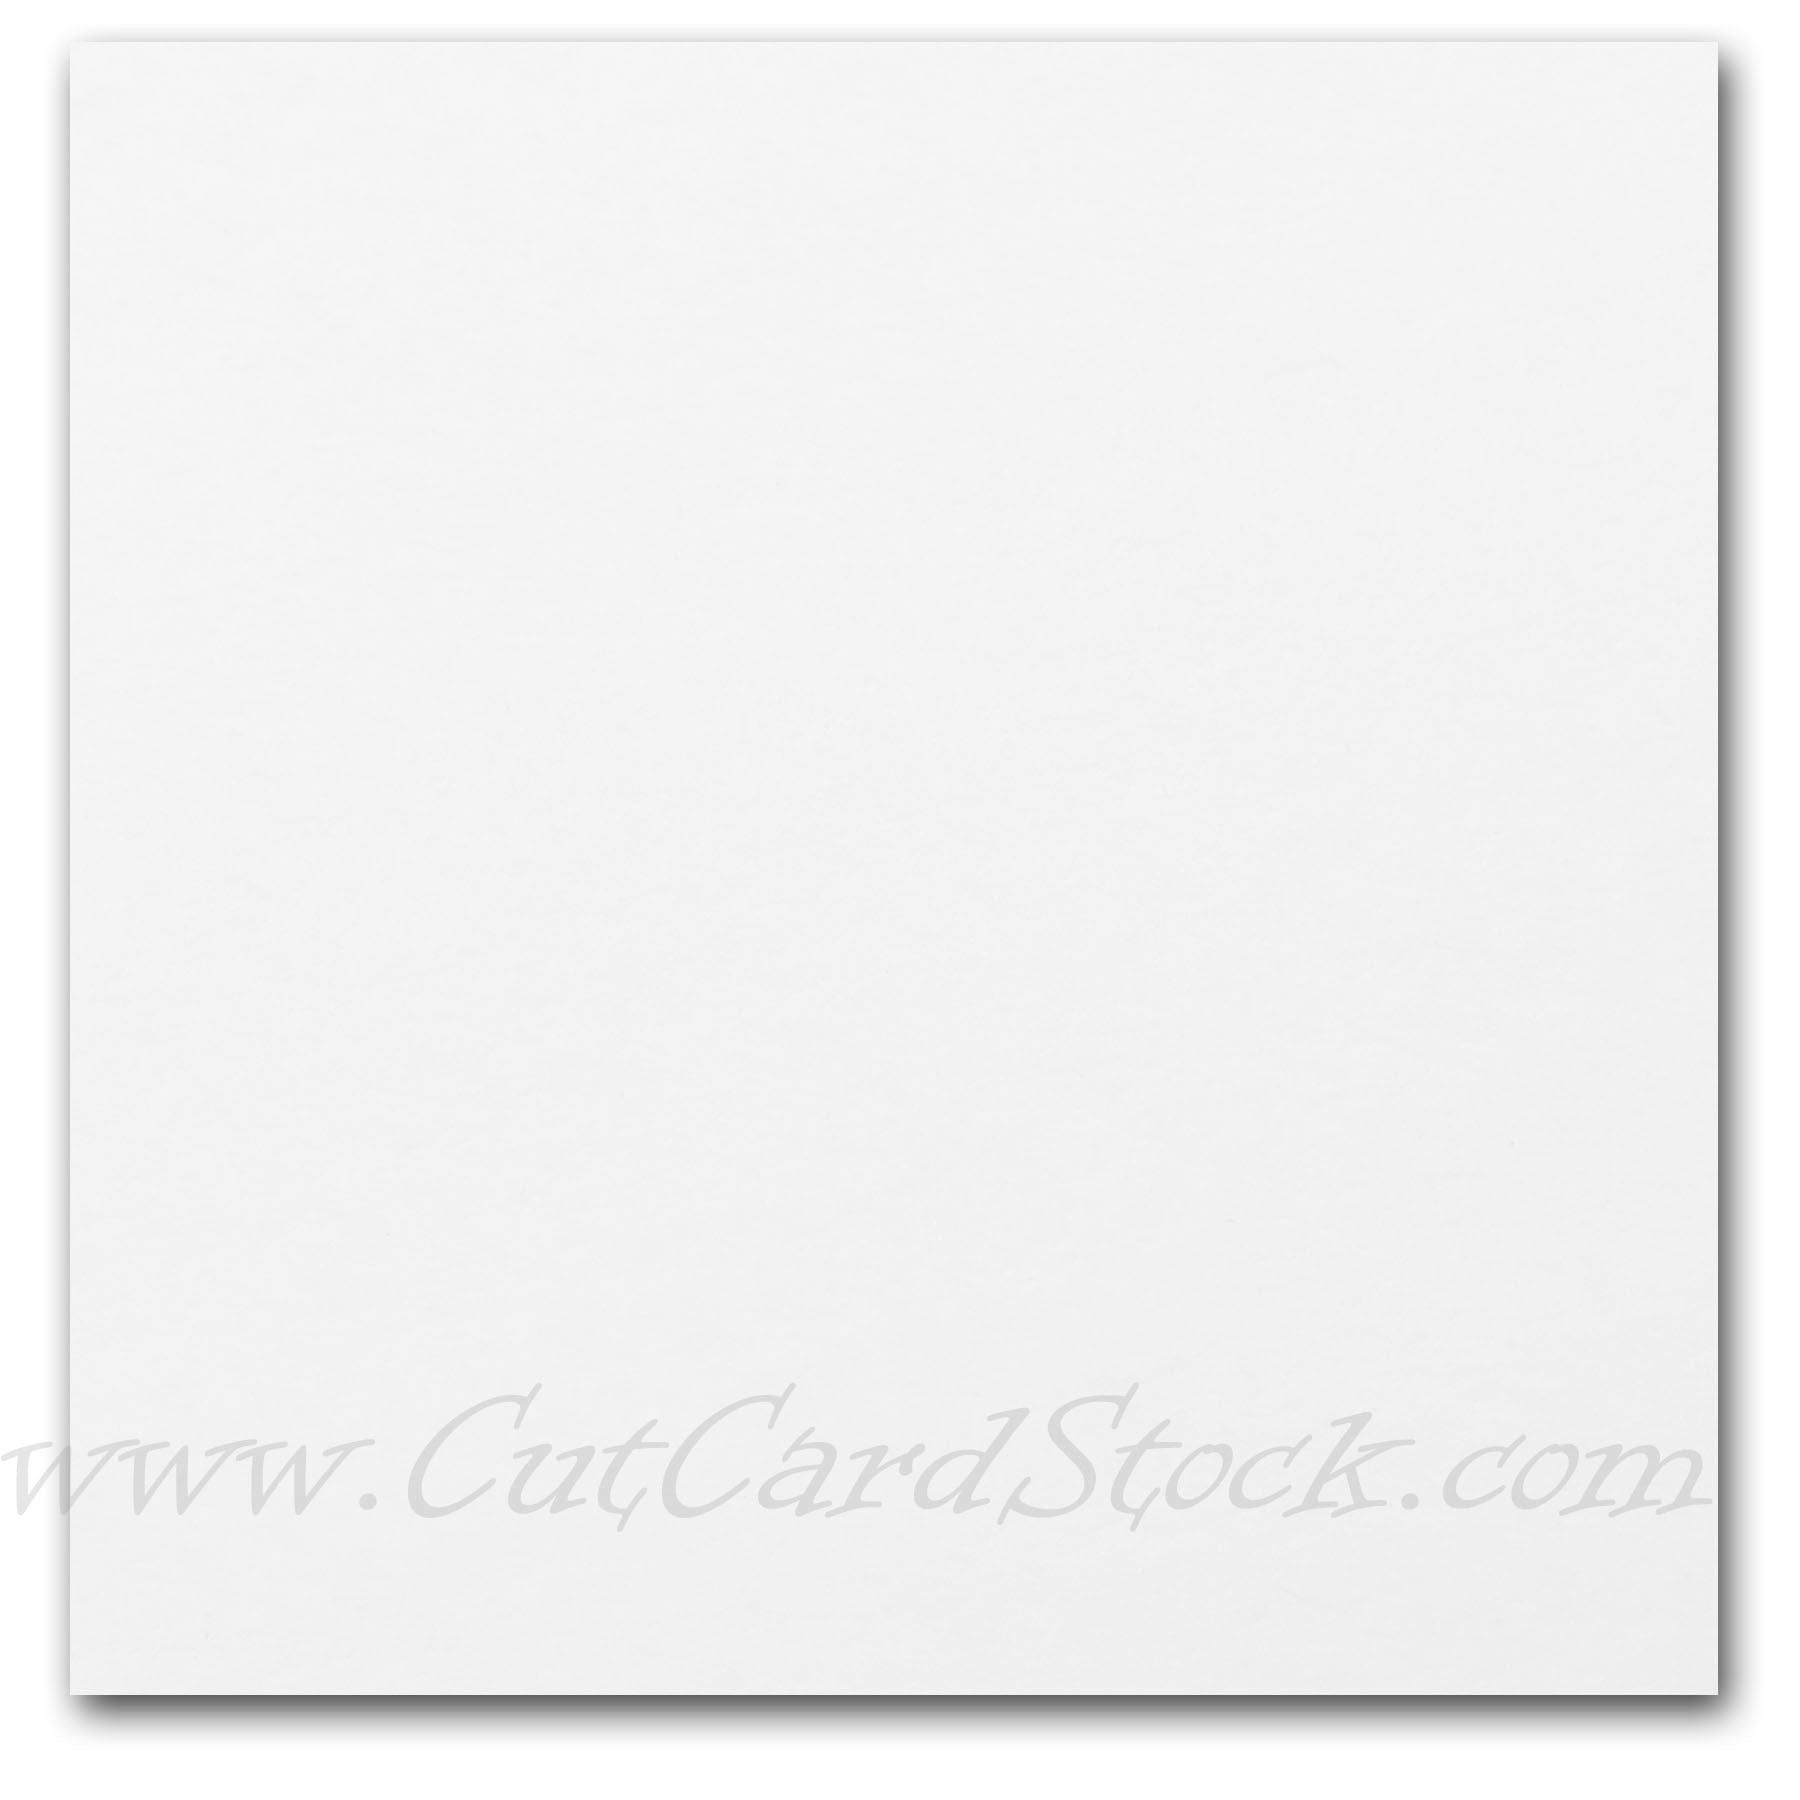 Springhill 015300 Digital Index White Card Stock, 110 lb, 8 1/2 x 11, 250  Sheets/Pack - 015300